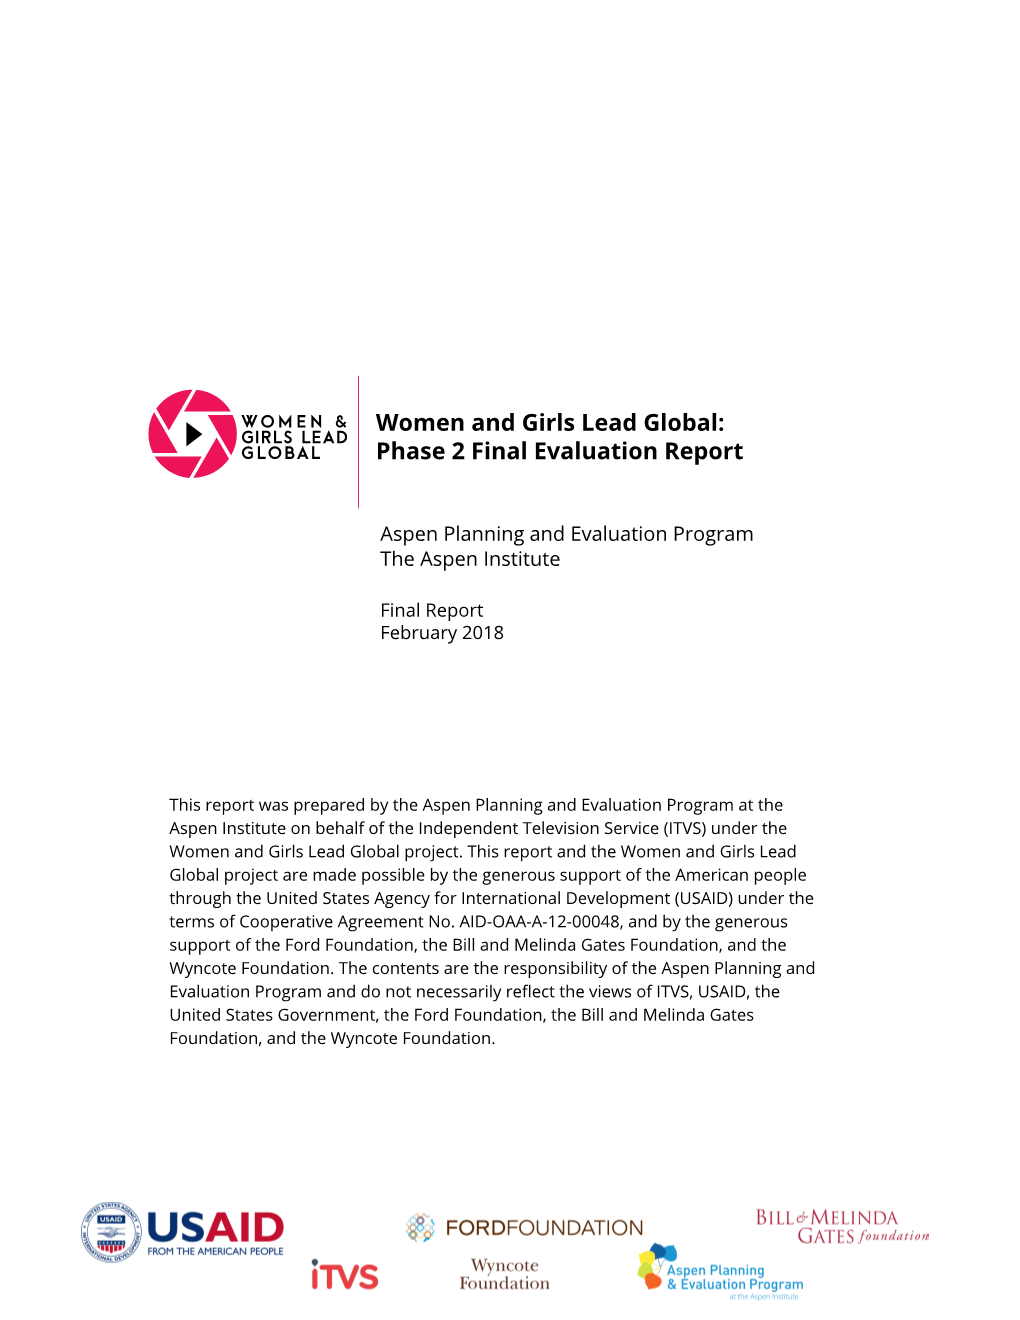 Women and Girls Lead Global: Phase 2 Final Evaluation Report